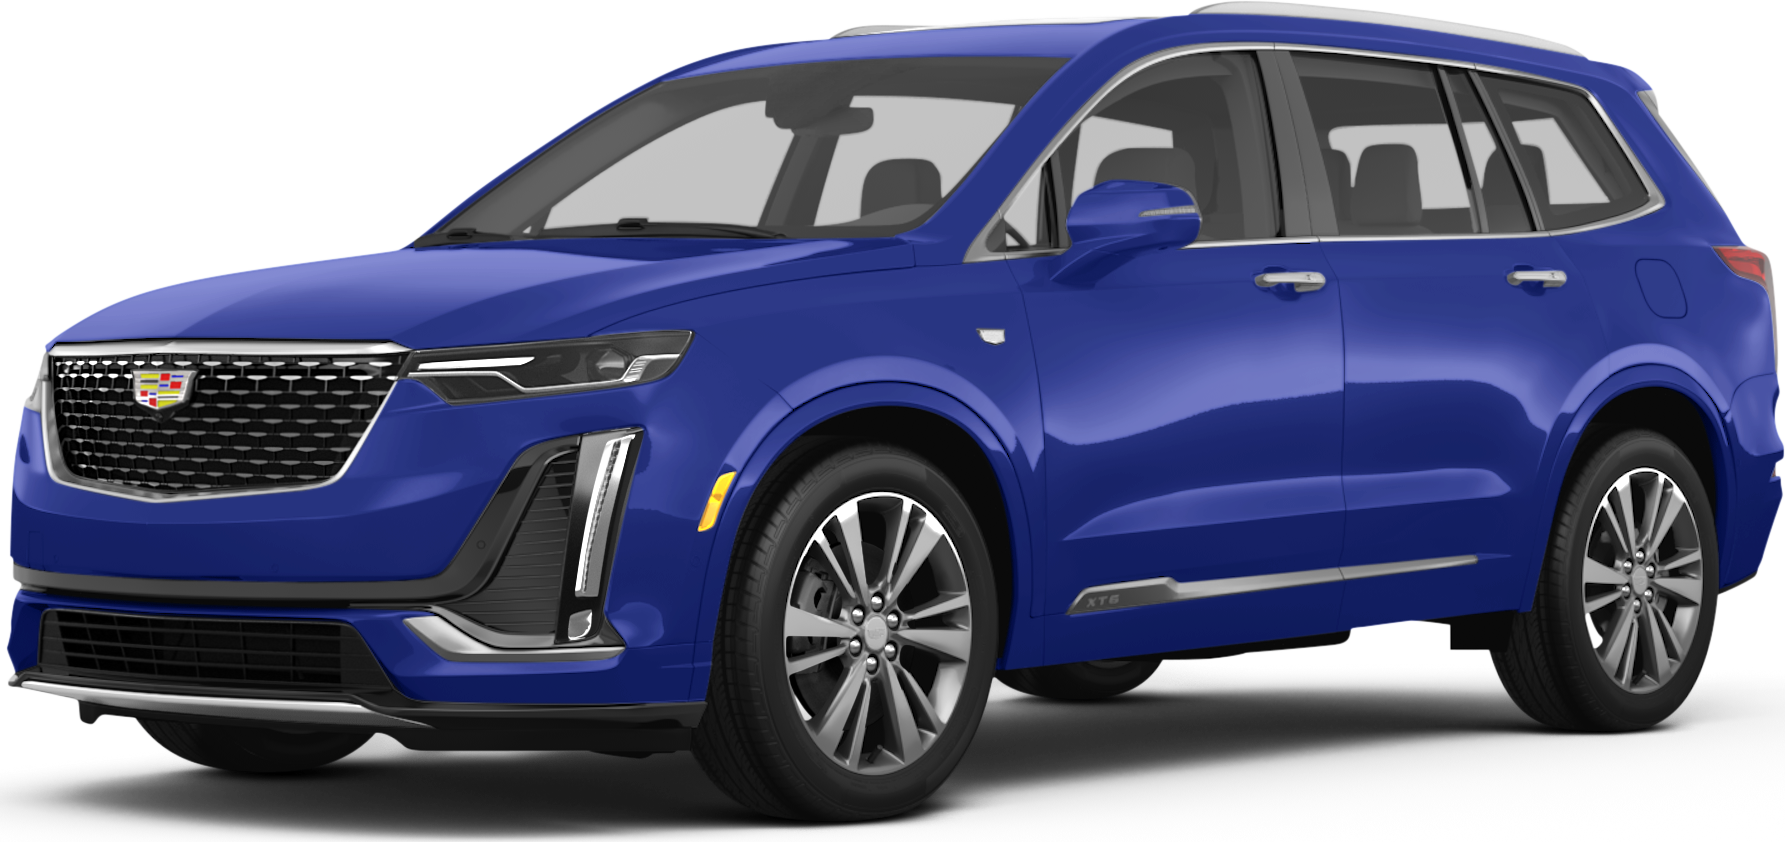 https://file.kelleybluebookimages.com/kbb/base/evox/CP/53107/2024-Cadillac-XT6-front_53107_032_1785x842_GTR_cropped.png